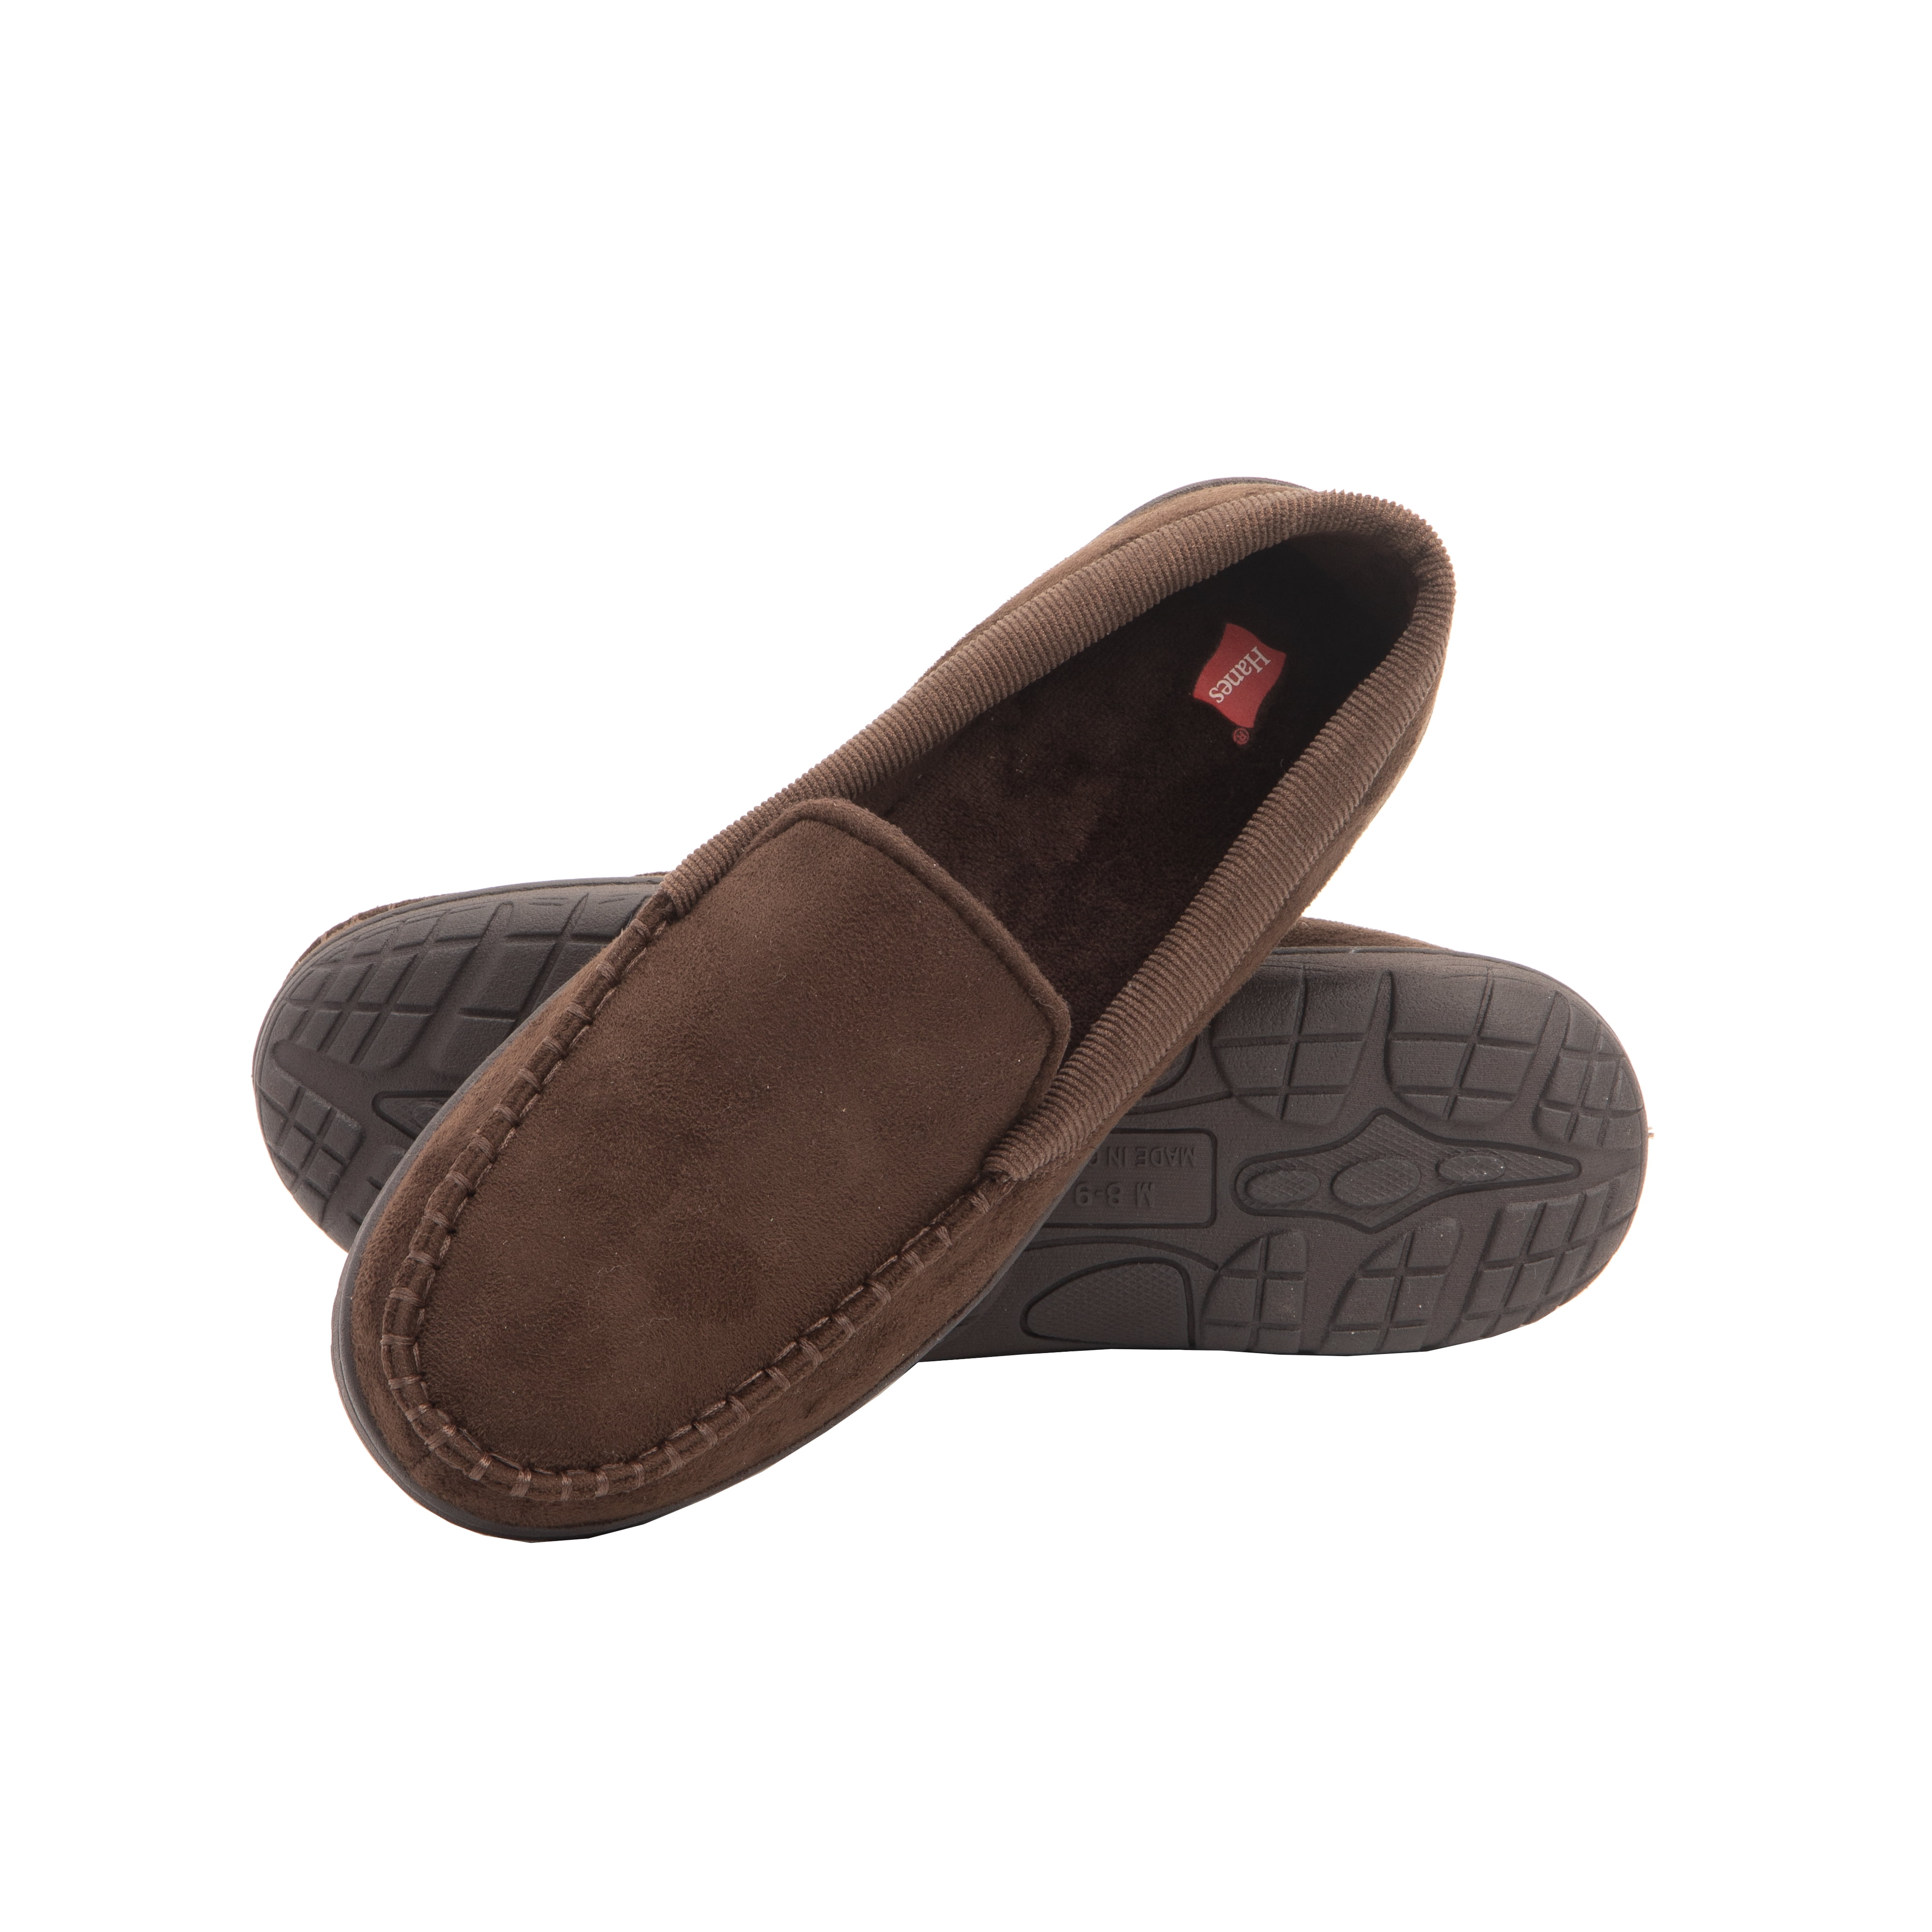 Hanes Mens Moccasin Slipper House Shoe with Indoor Outdoor Memory Foam Sole Fresh Iq Odor Protection